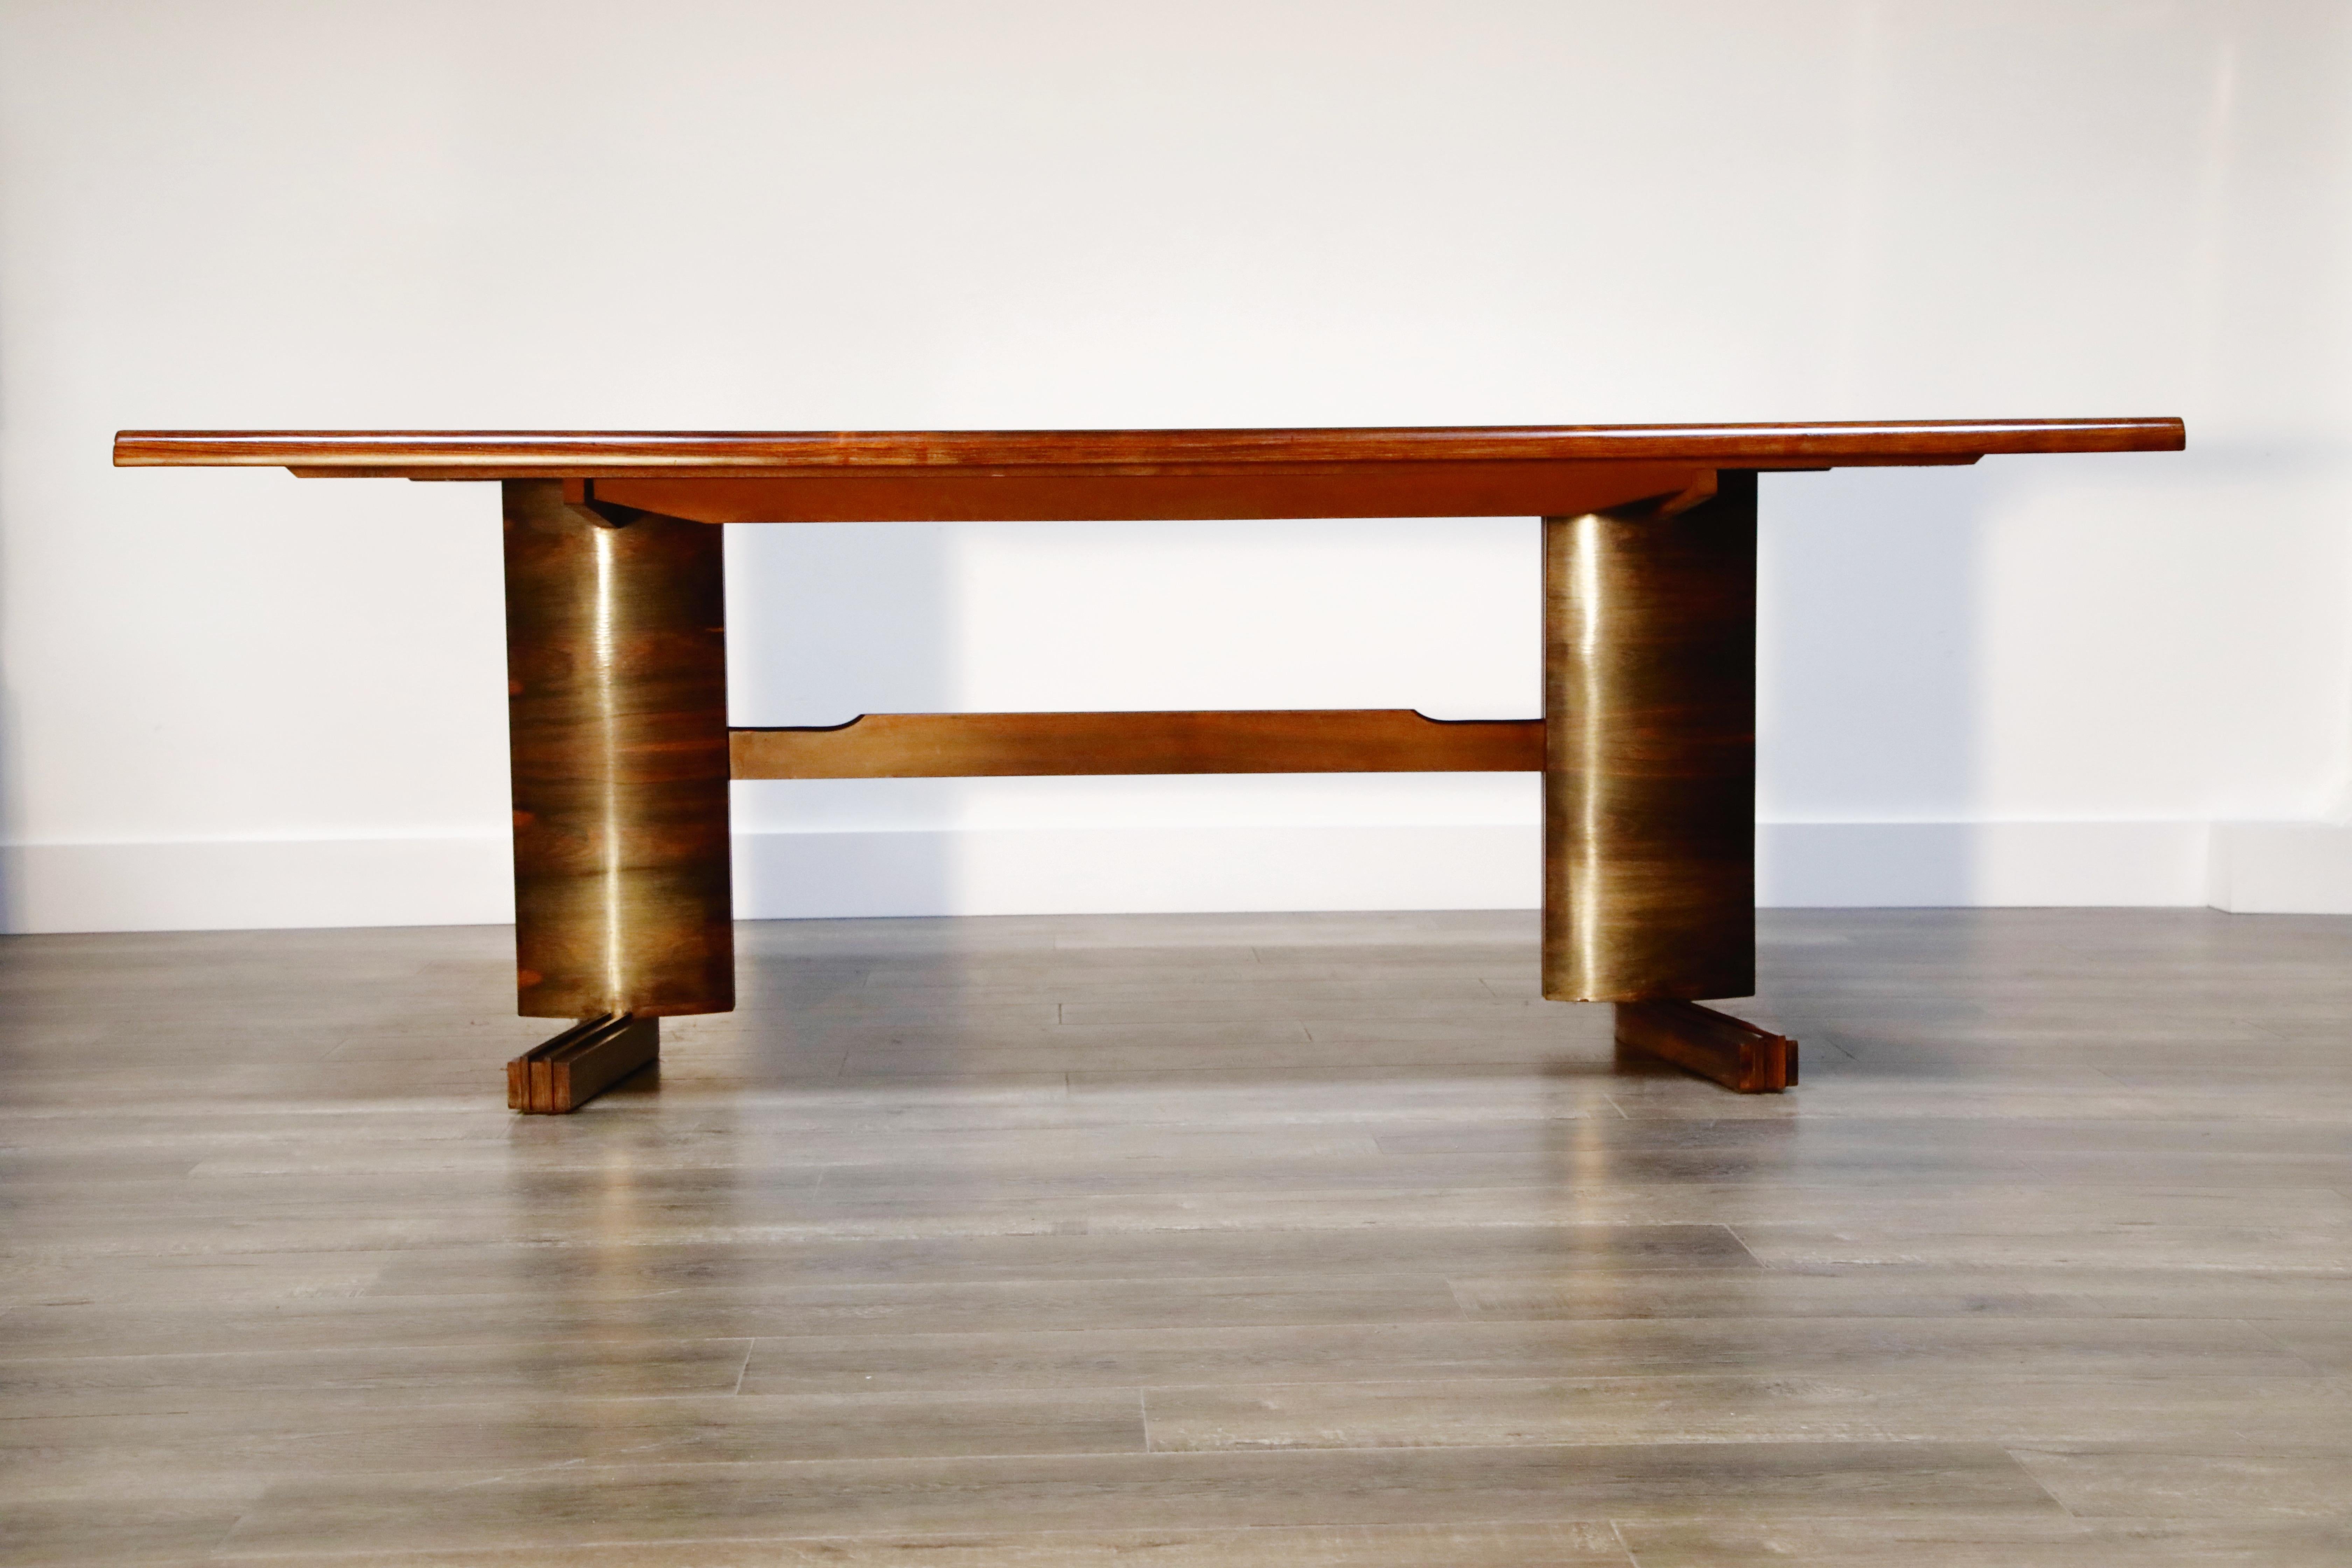 A gorgeous Brazilian Modern dining table with incredible vivacious grain by Novo Rumo, produced in the 1960s. The top features a flamed grain pattern with deep veins and stunning color with rounded edges along the longer sides of the table and a